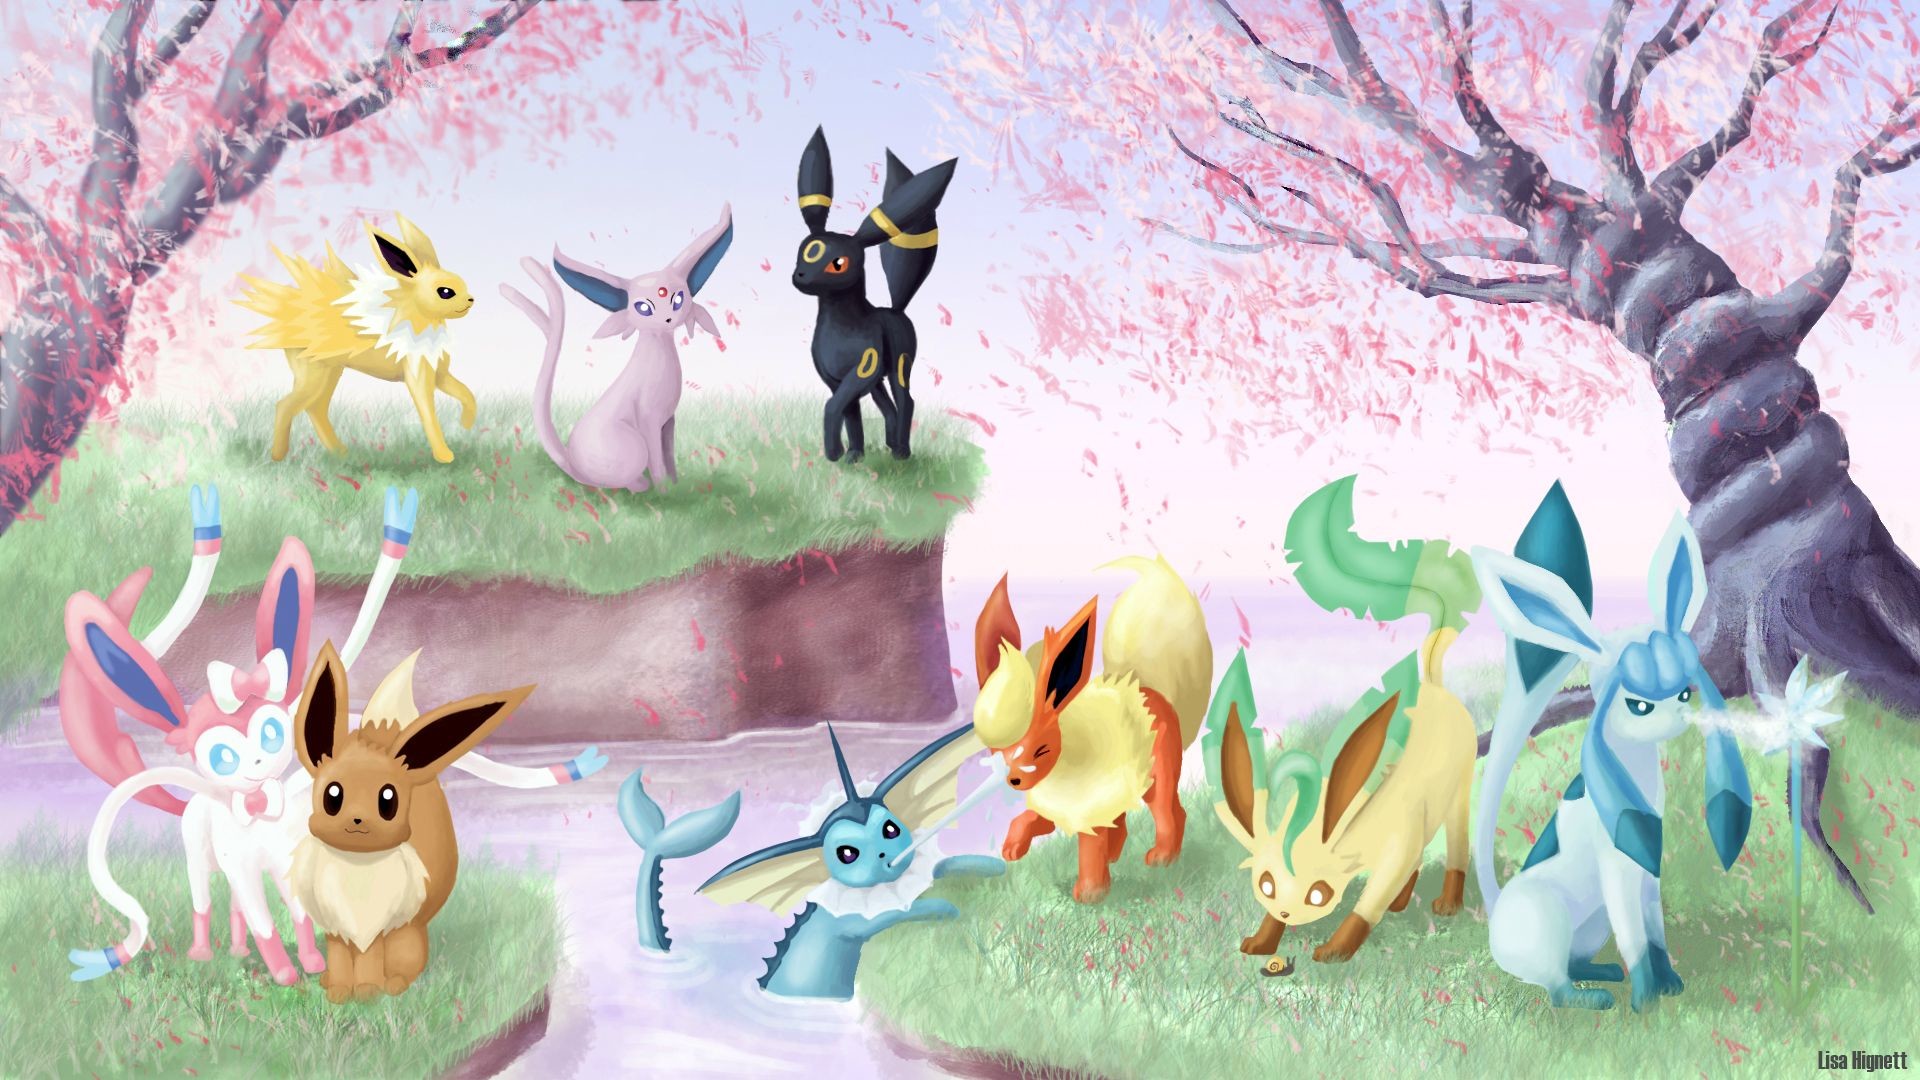 1920x1080 I created this Eeveelution background today!